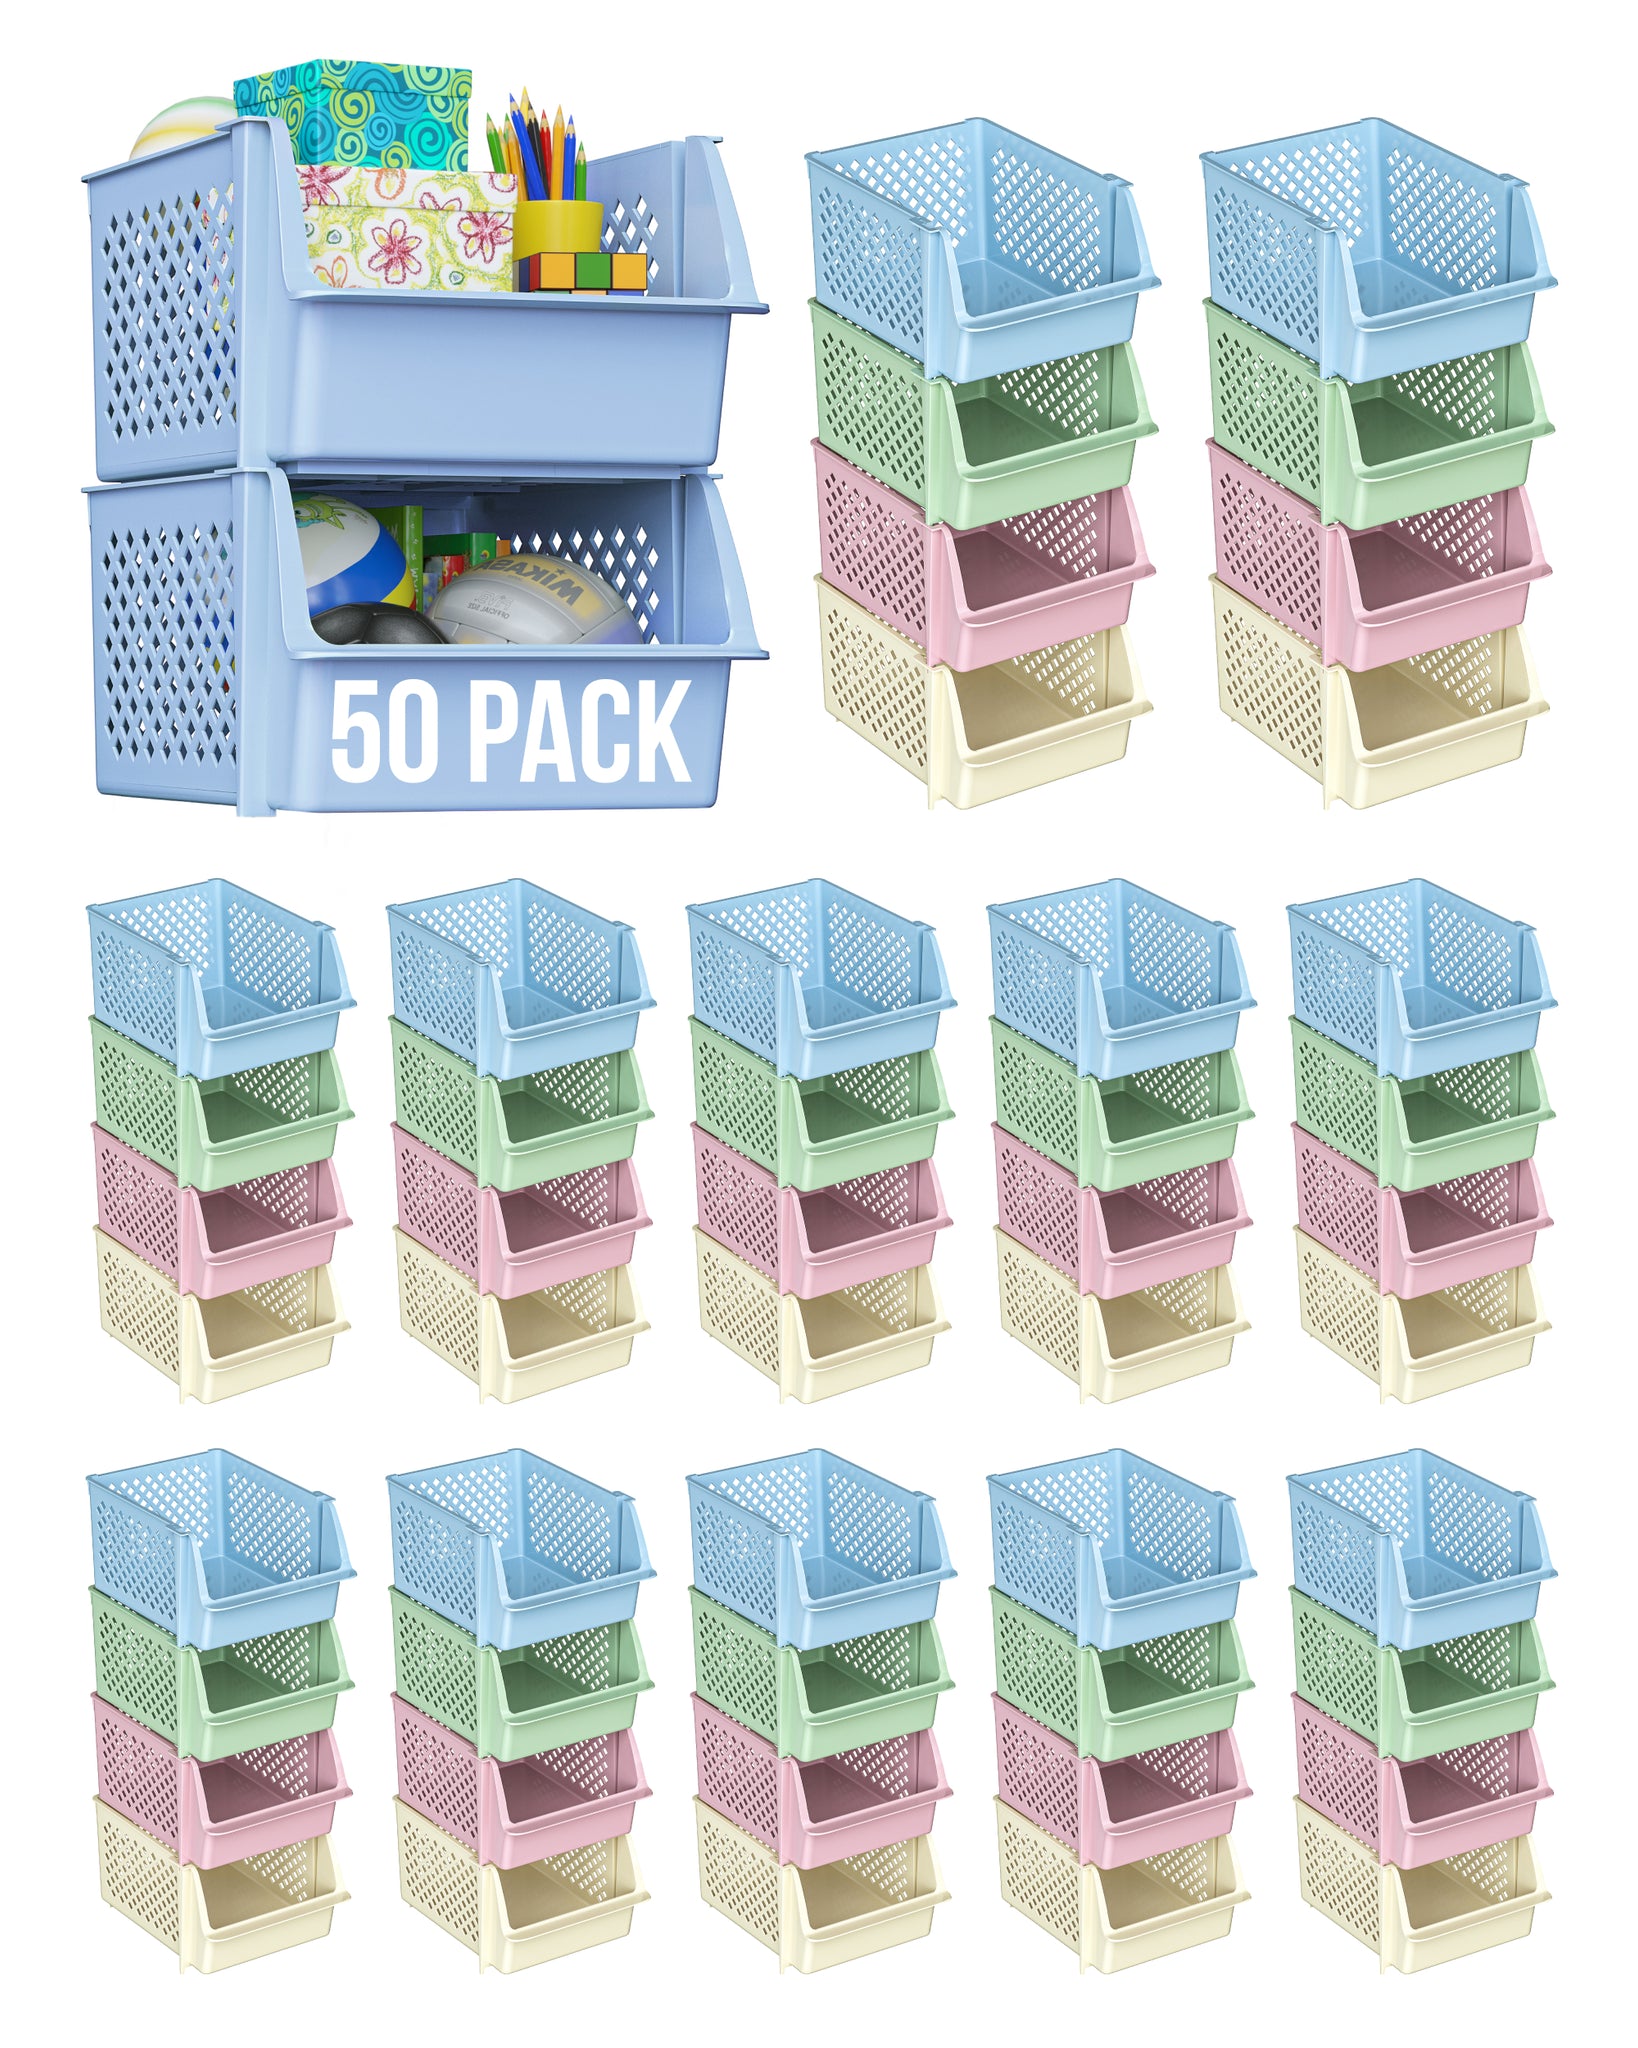 Casewin Plastic Storage Boxes, Multiple Colour Organisation Storage Baskets  for Kitchen, Cupboard, Office, Bathroom, Toy, Home Tidy Open Storage Bins  with Handles (7 Pack) 